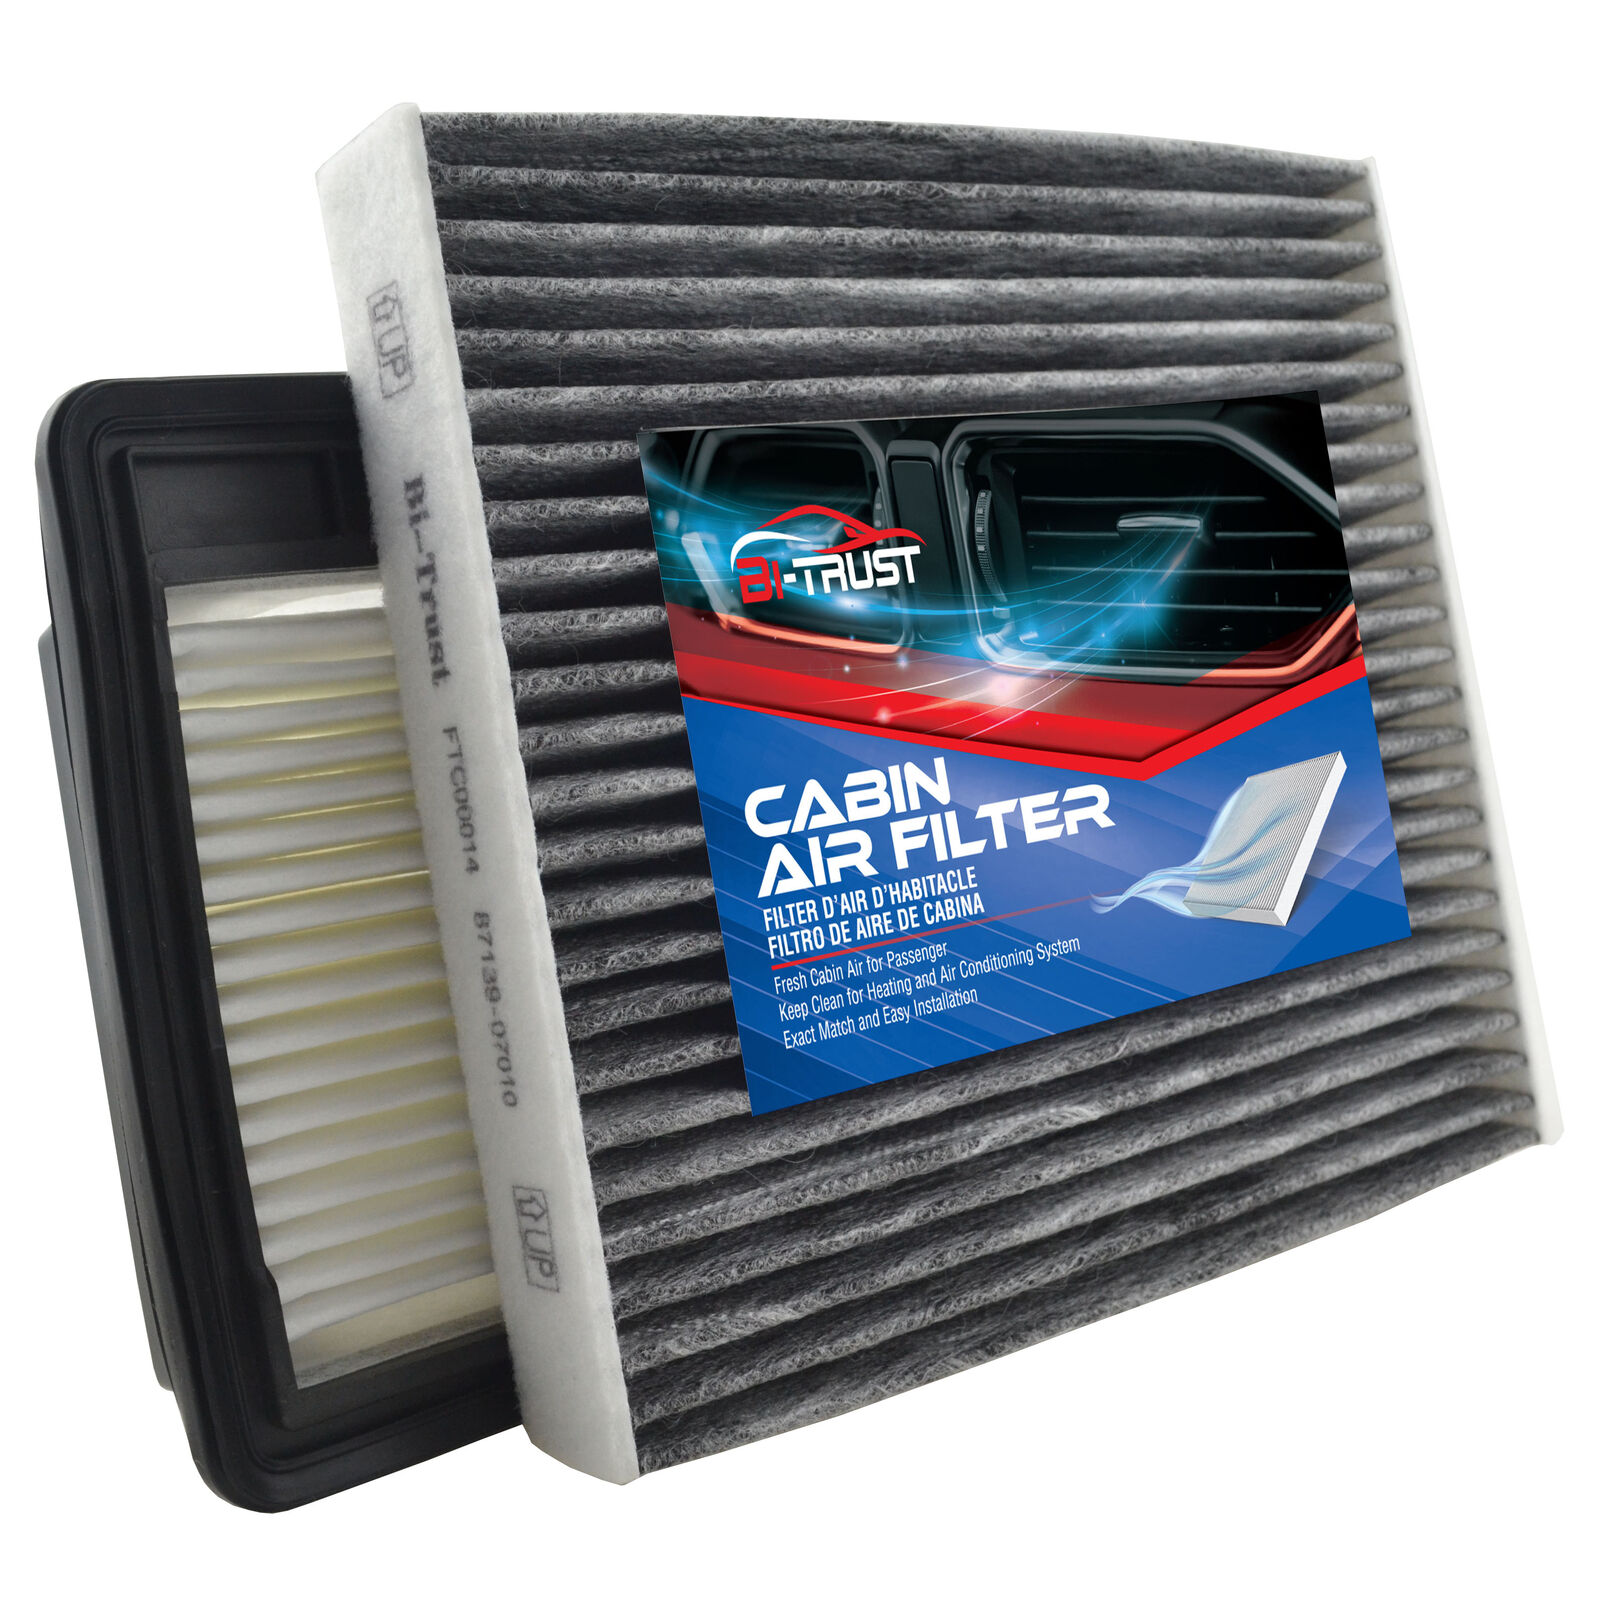 Engine & Cabin Air Filter for Honda CR-Z 1.5L ELECTRIC/GAS Hybrid 2011-2016